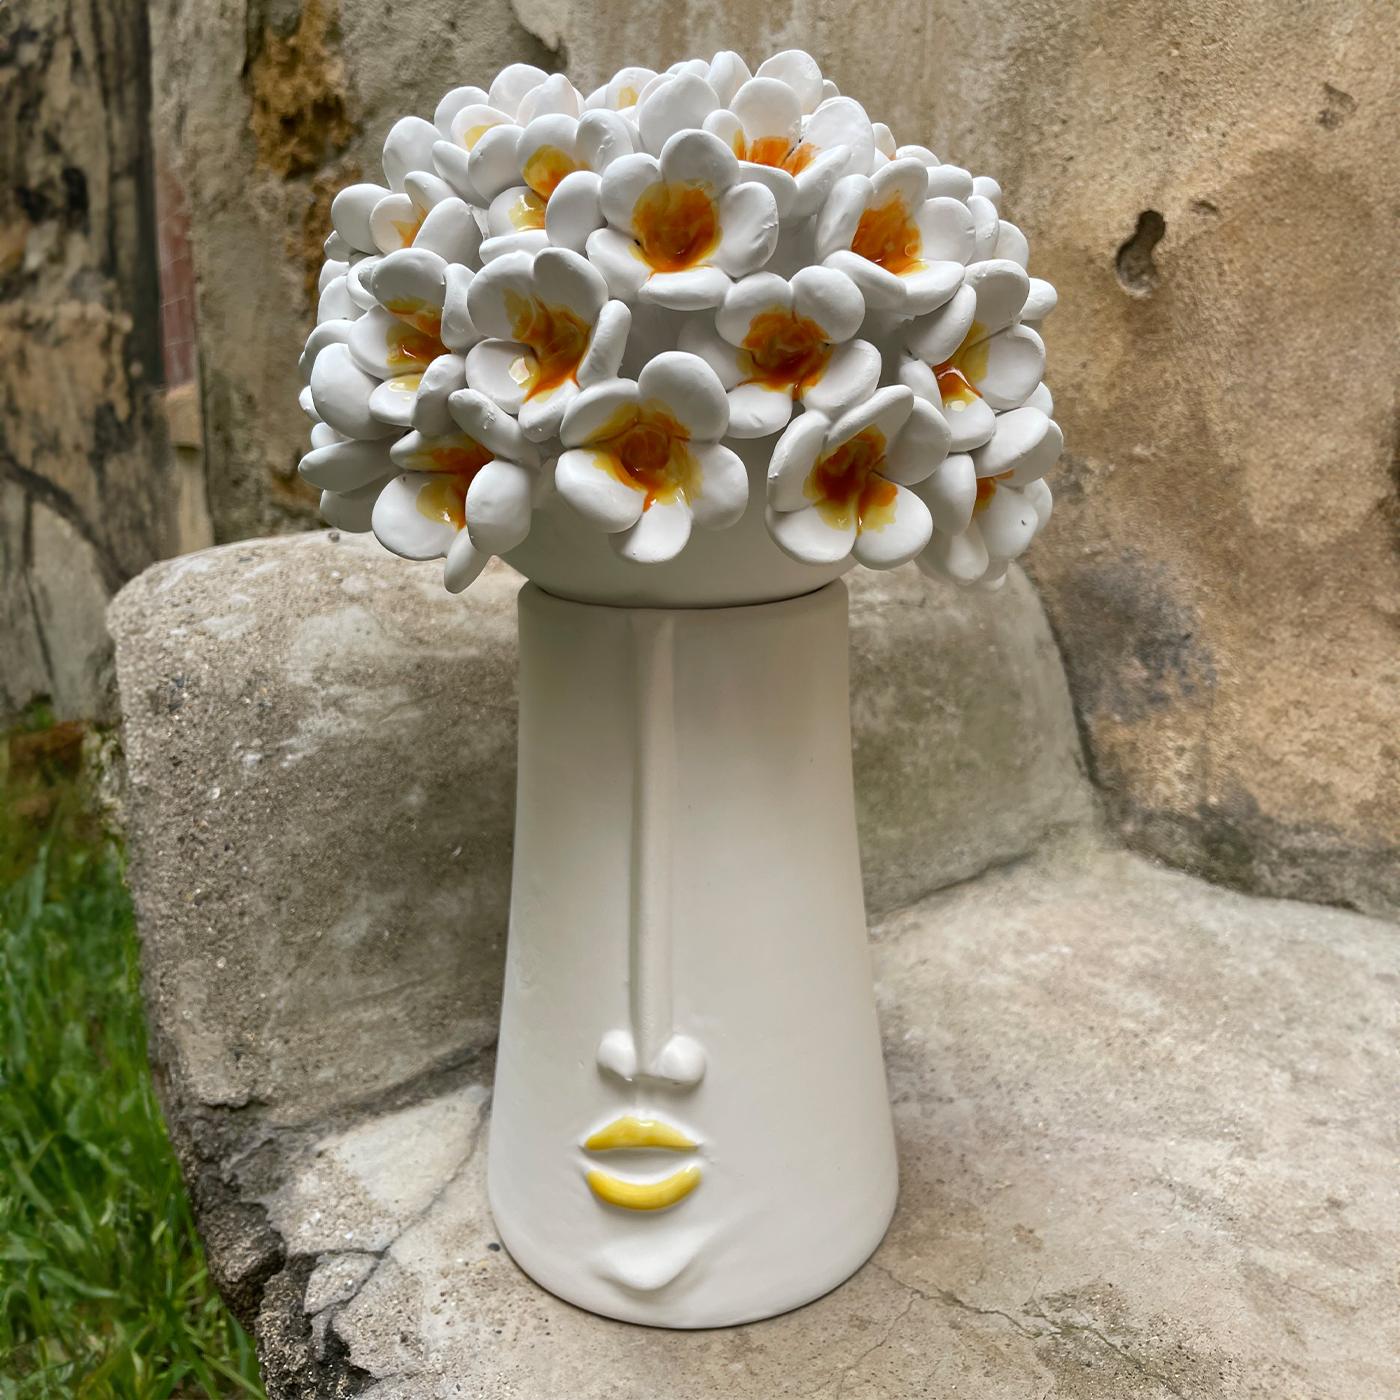 A bouquet of white flowers with fleshy petals is the lid to this precious ceramic piece flaunting elegant anthropomorphic traits. An ideal addition to a contemporary dining table or entryway console, the design incorporates a wide inner storage unit